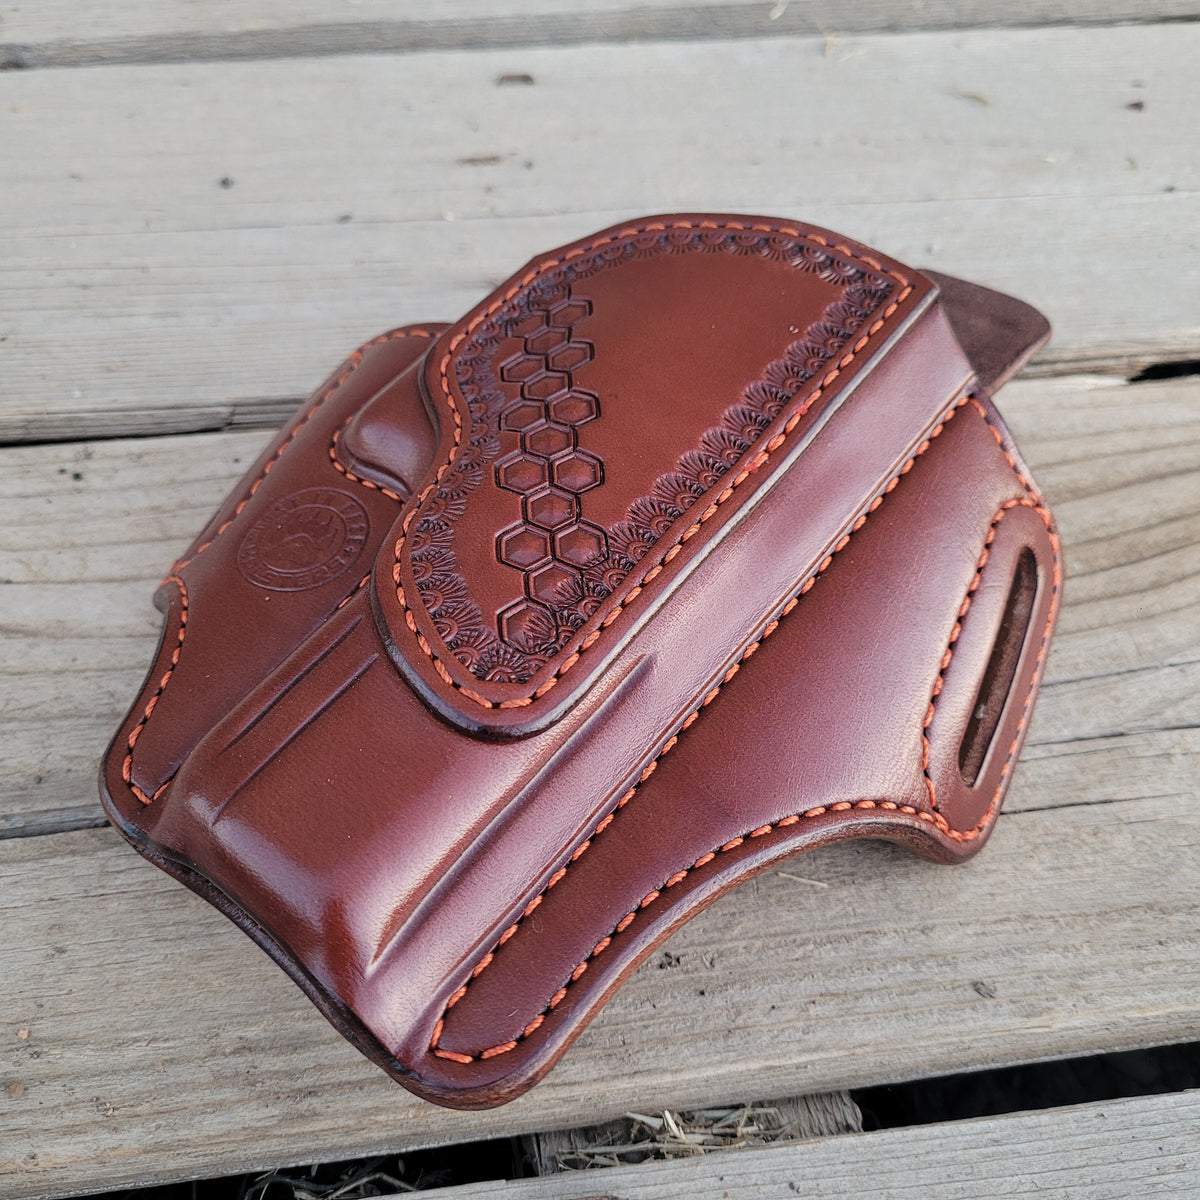 Glock 17/22 Classic Holster Brown